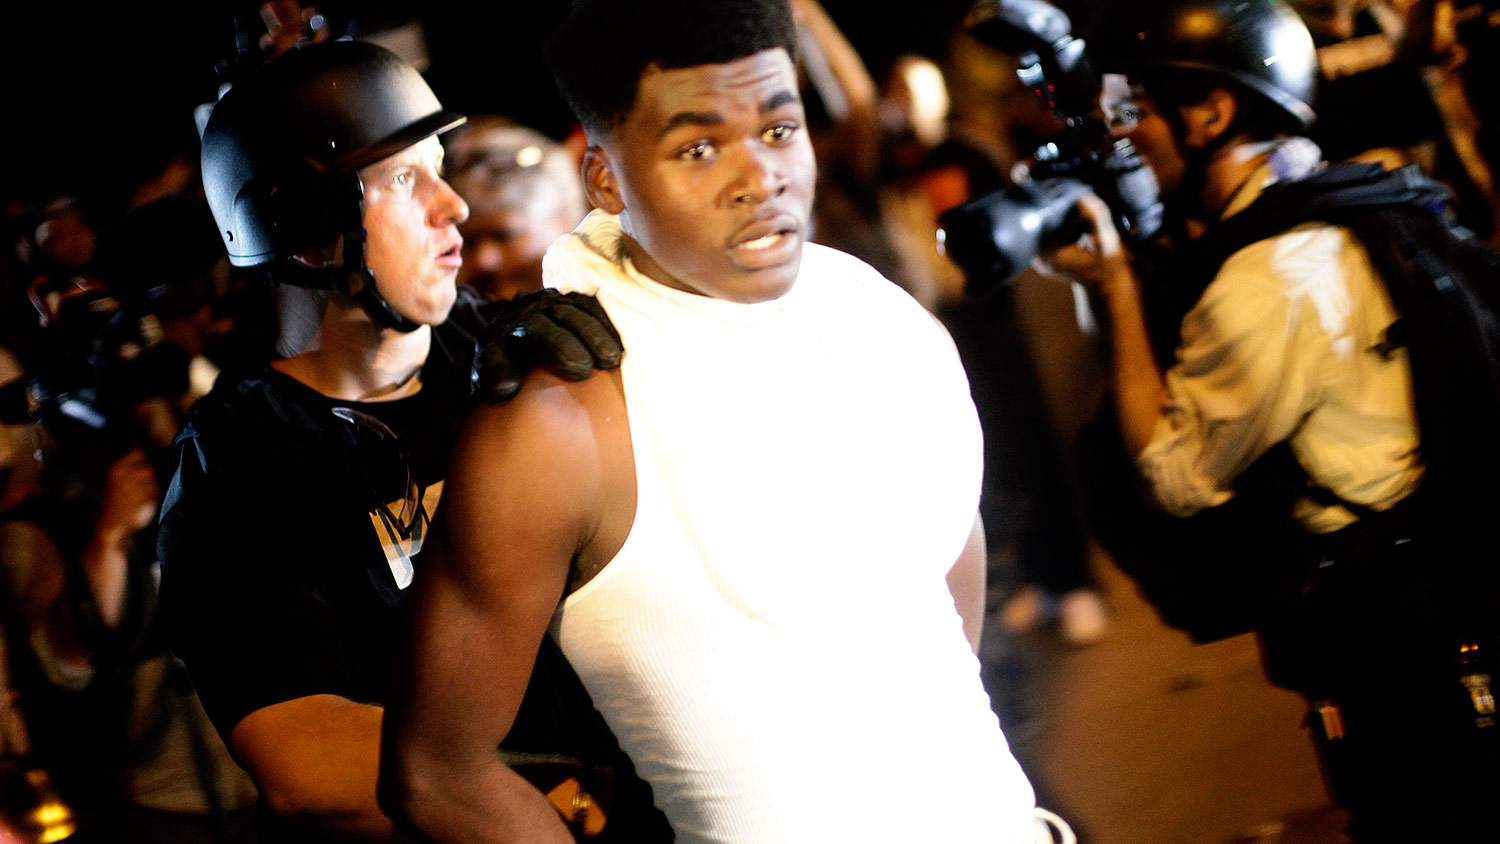 A police officer in riot gear detains a demonstrator protesting against the shooting of Michael Brown, in Ferguson, Missouri August 19, 2014.